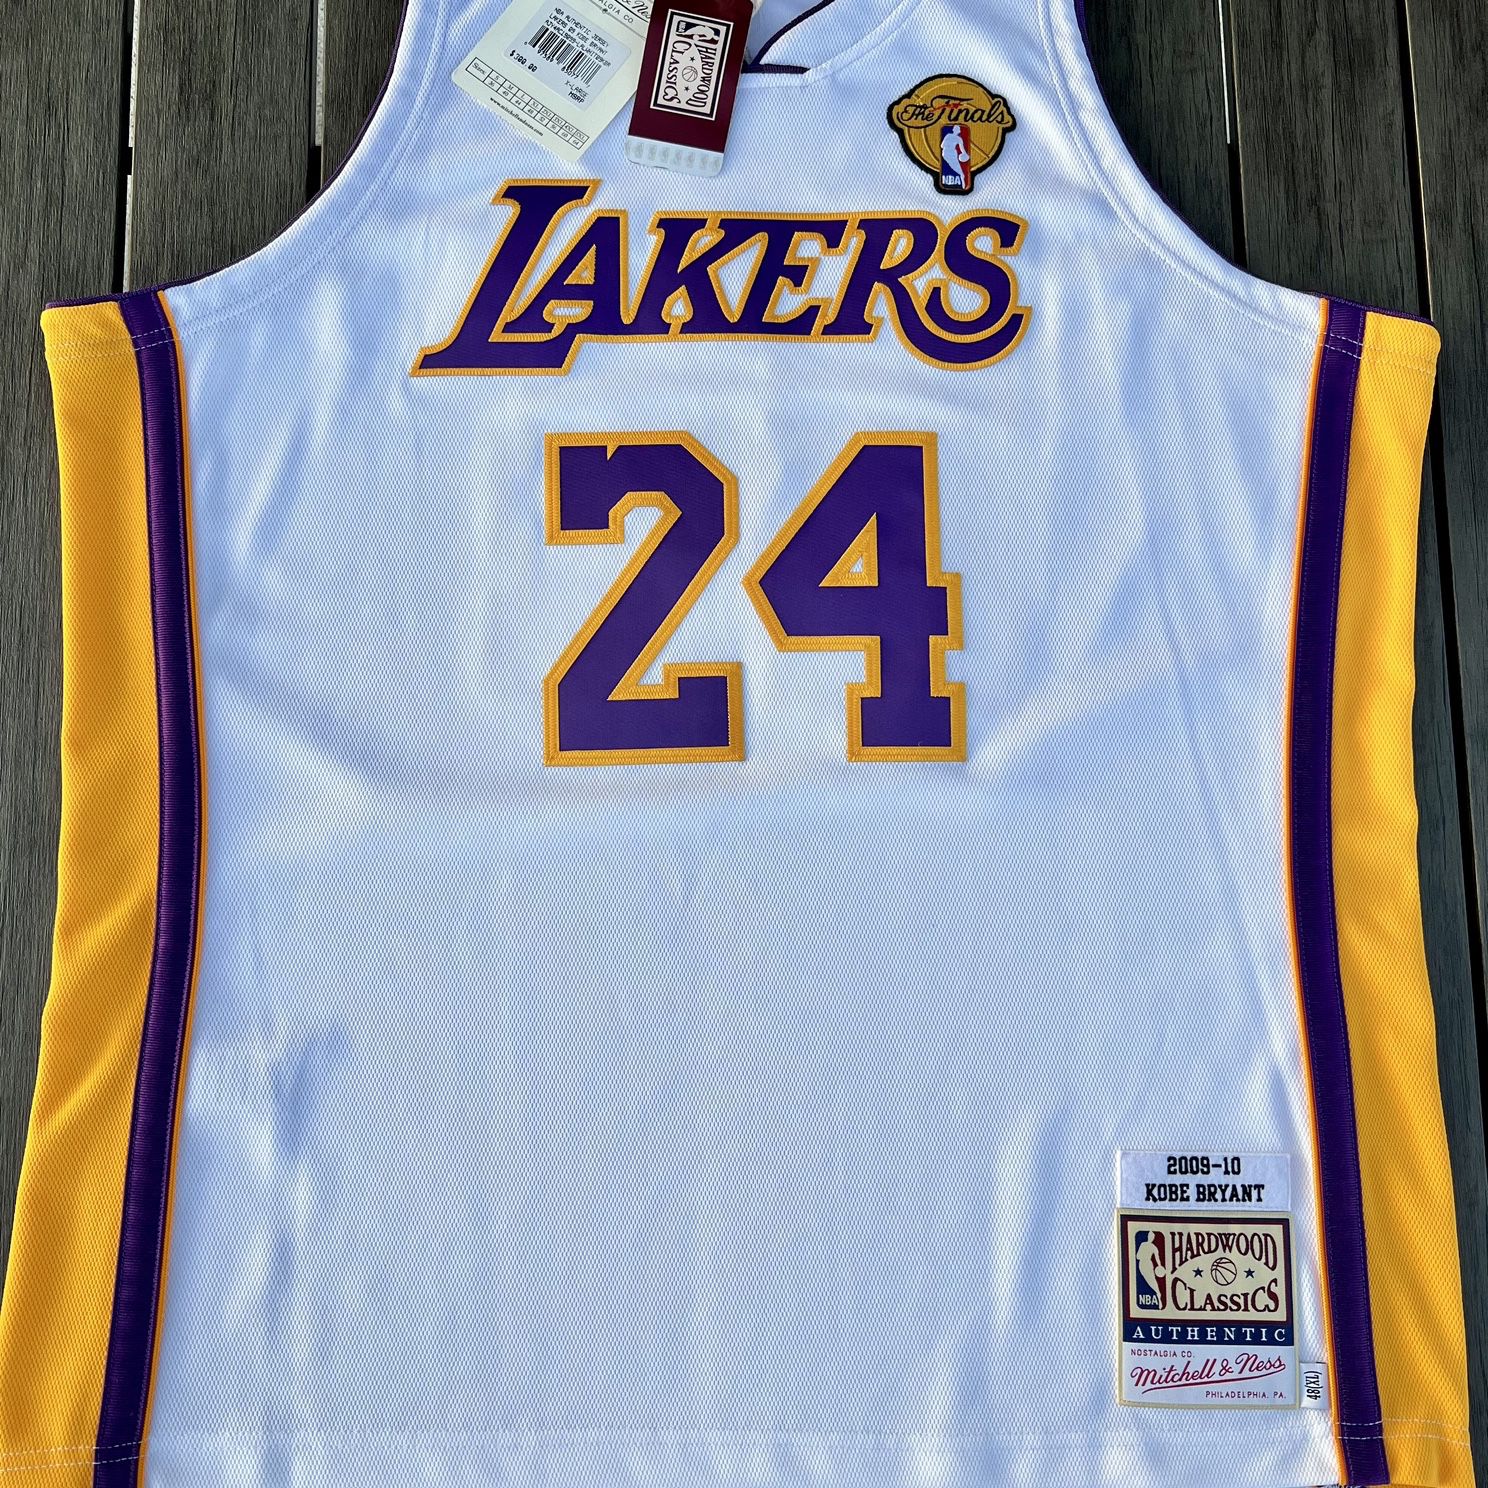 Nike, Other, Authentic Kobe Bryant Lakers Jersey 24 White